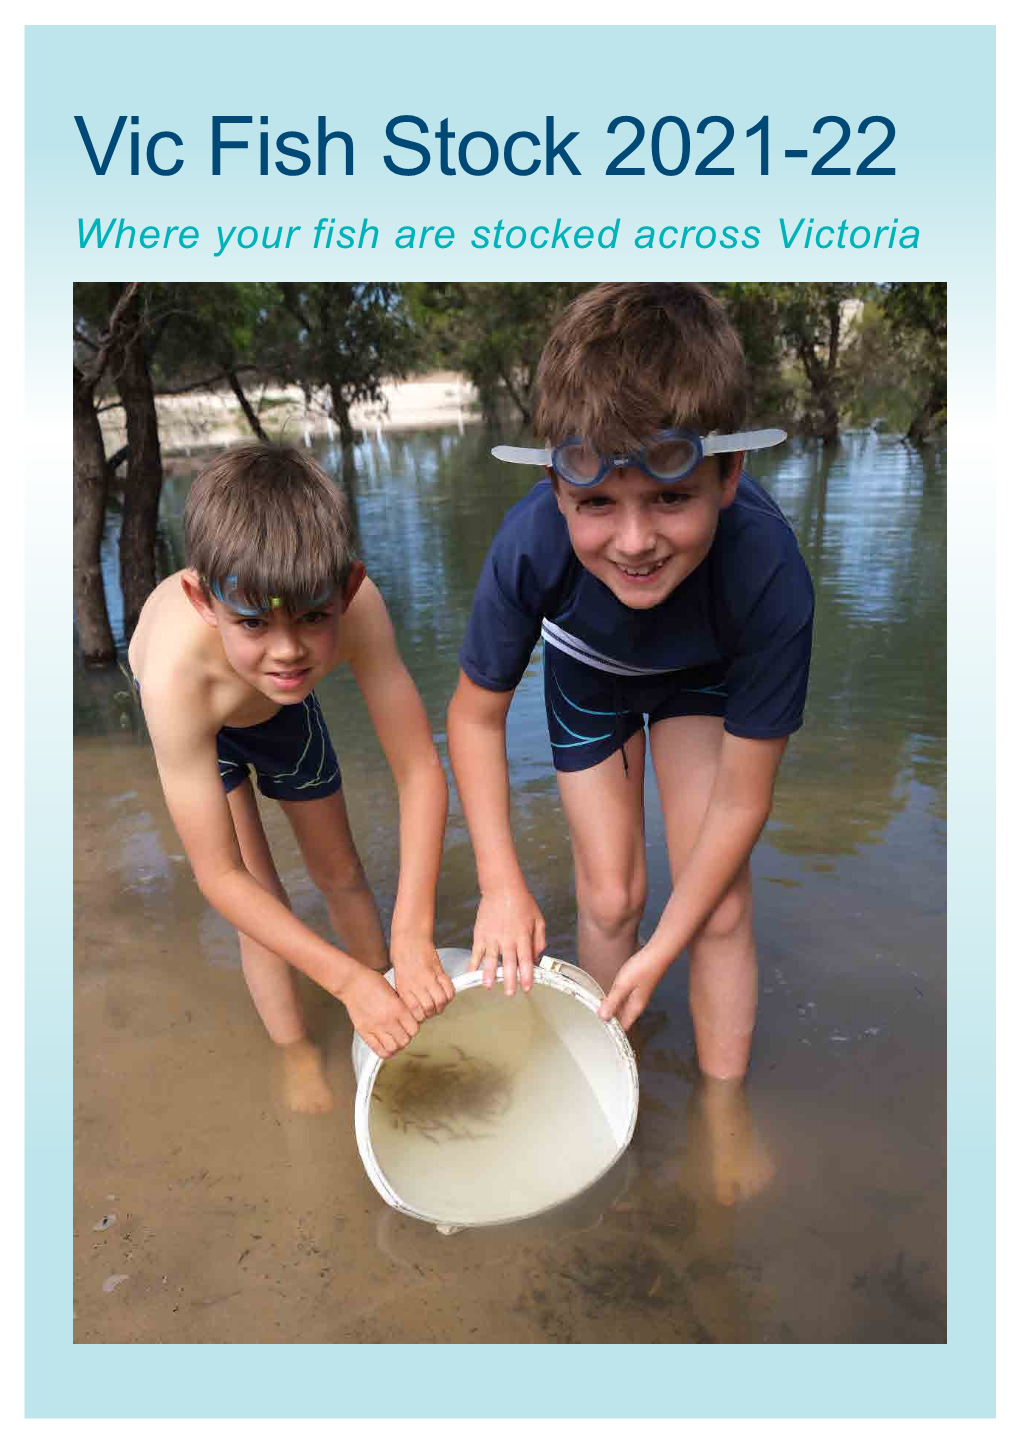 Vic Fish Stock 2021-22 Where Your Fish Are Stocked Across Victoria